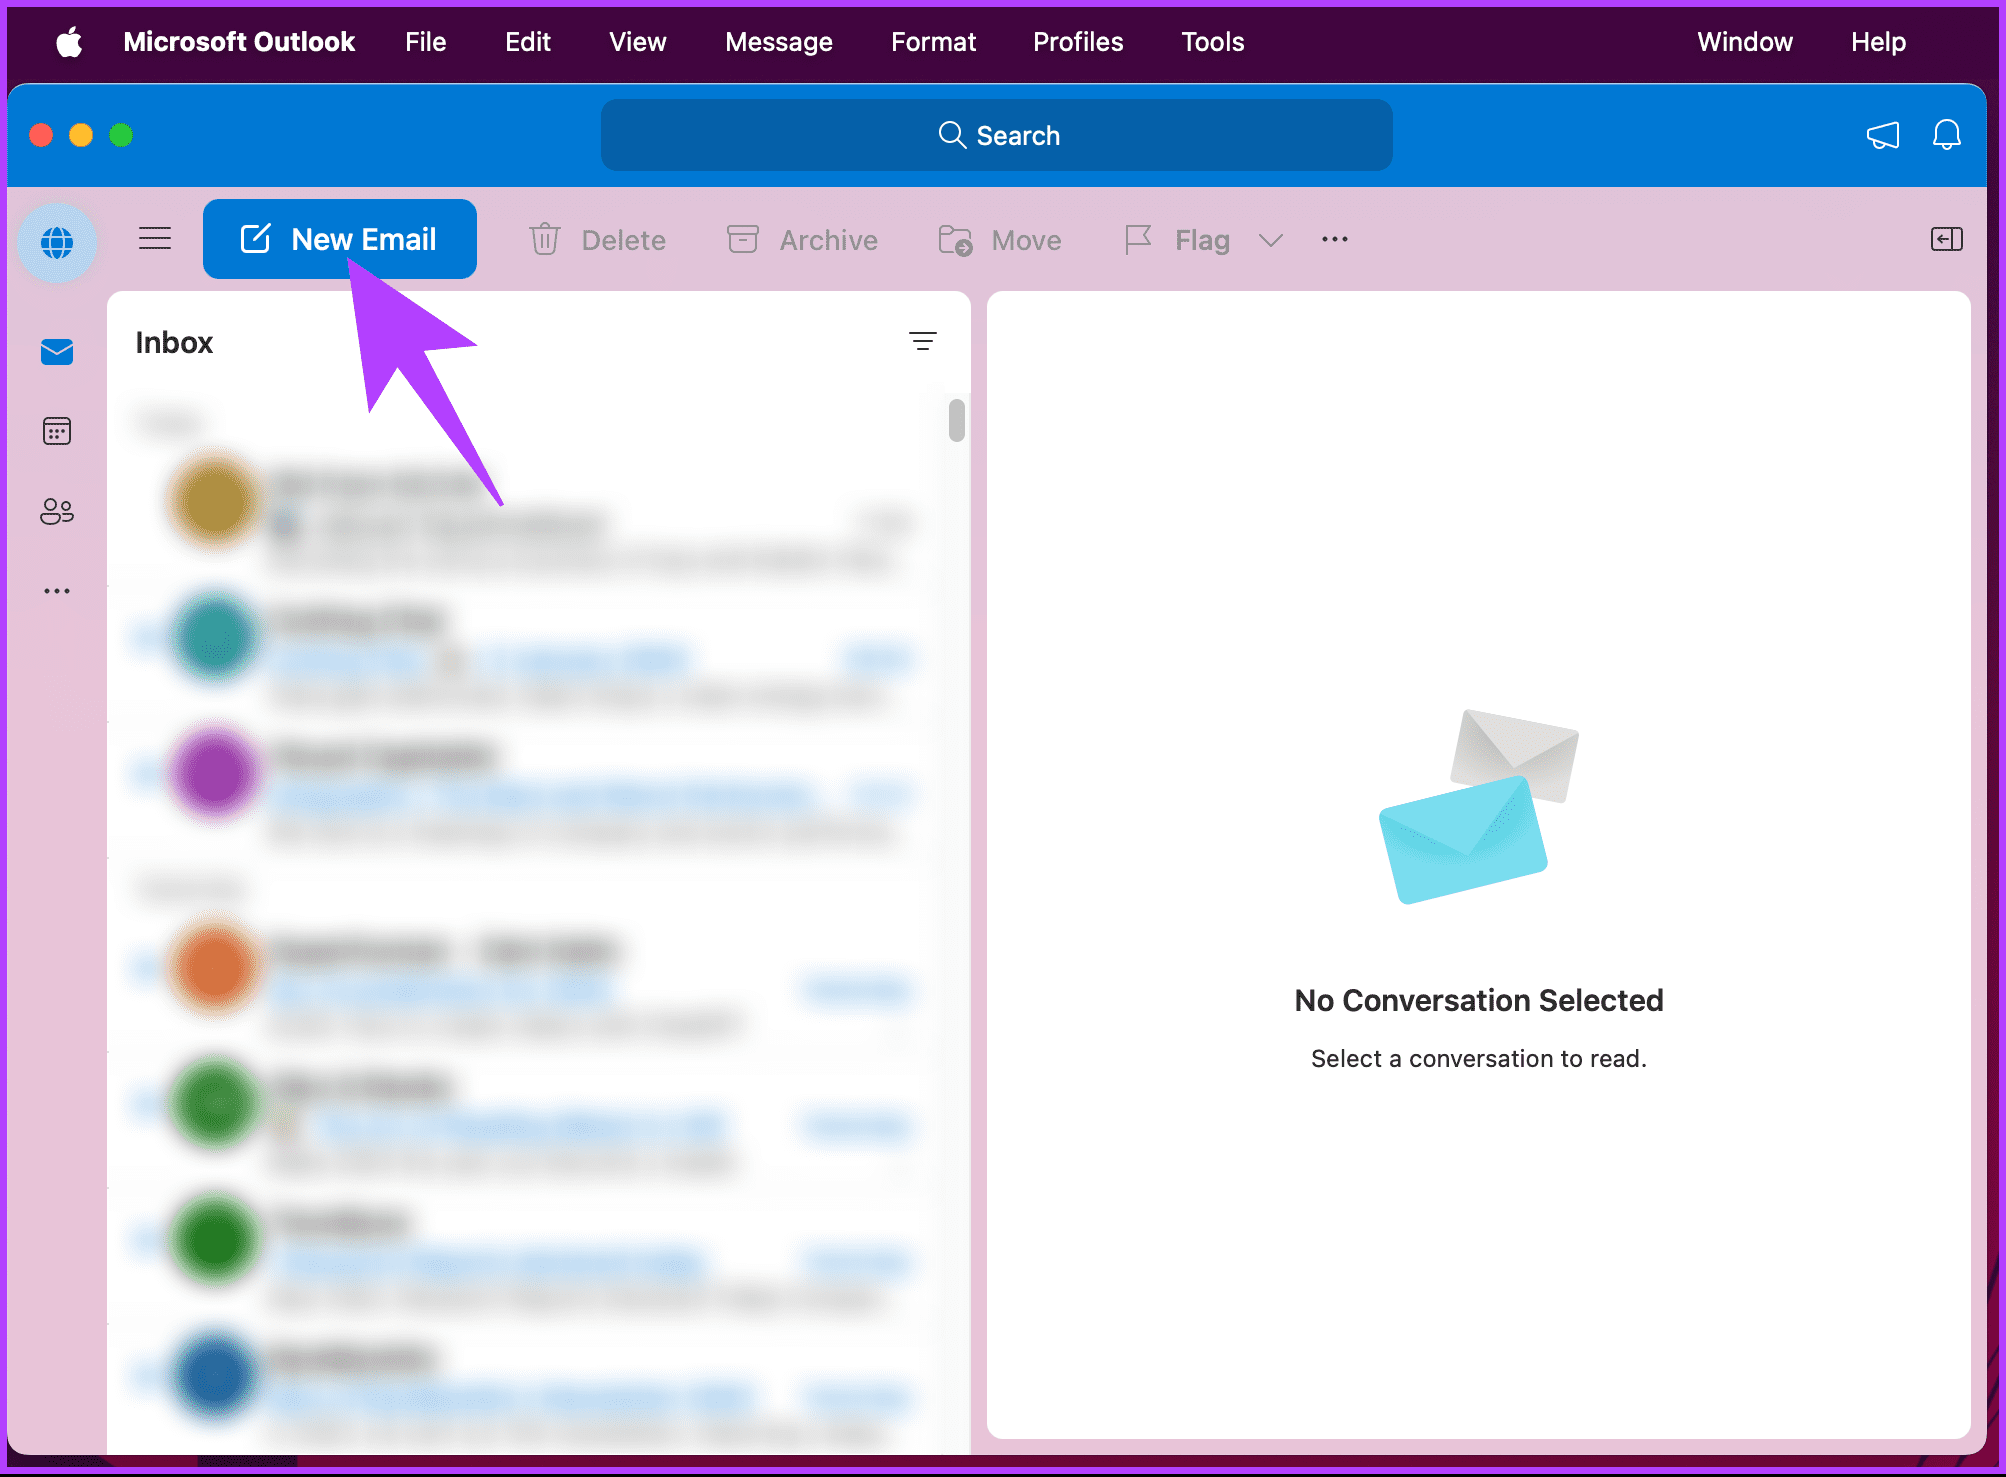 click on the New email button